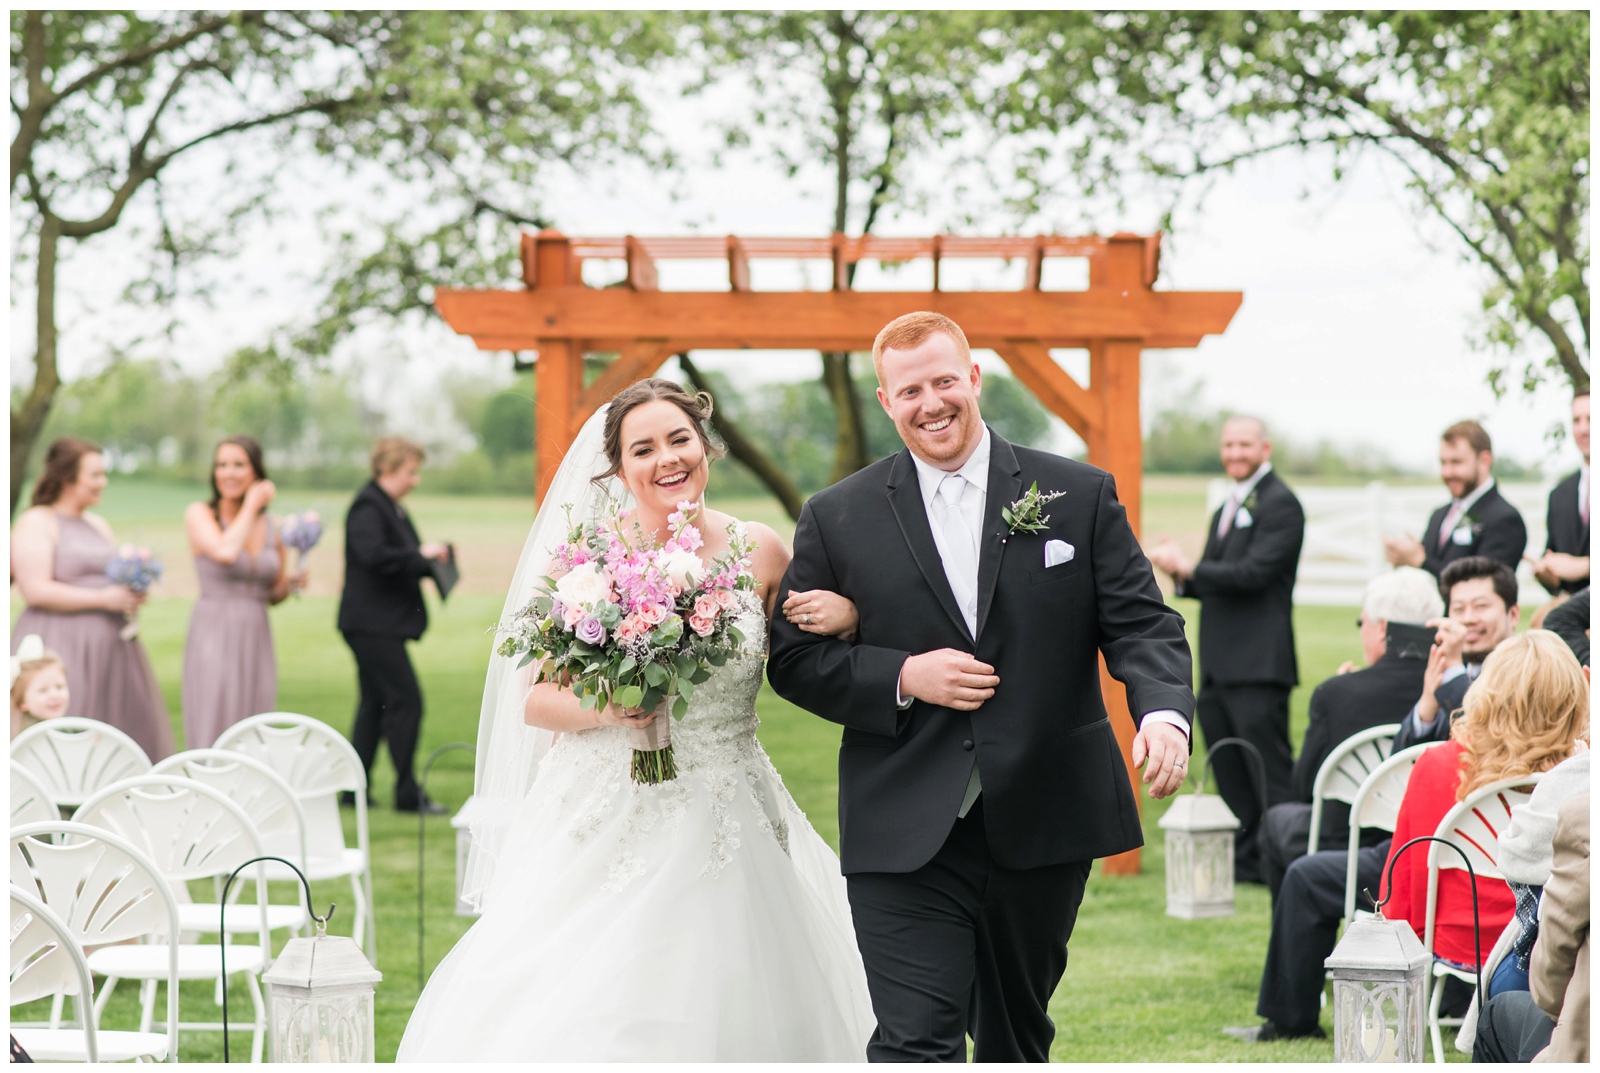 newly married couple walk up aisle at Pretty Prairie Farms wedding ceremony